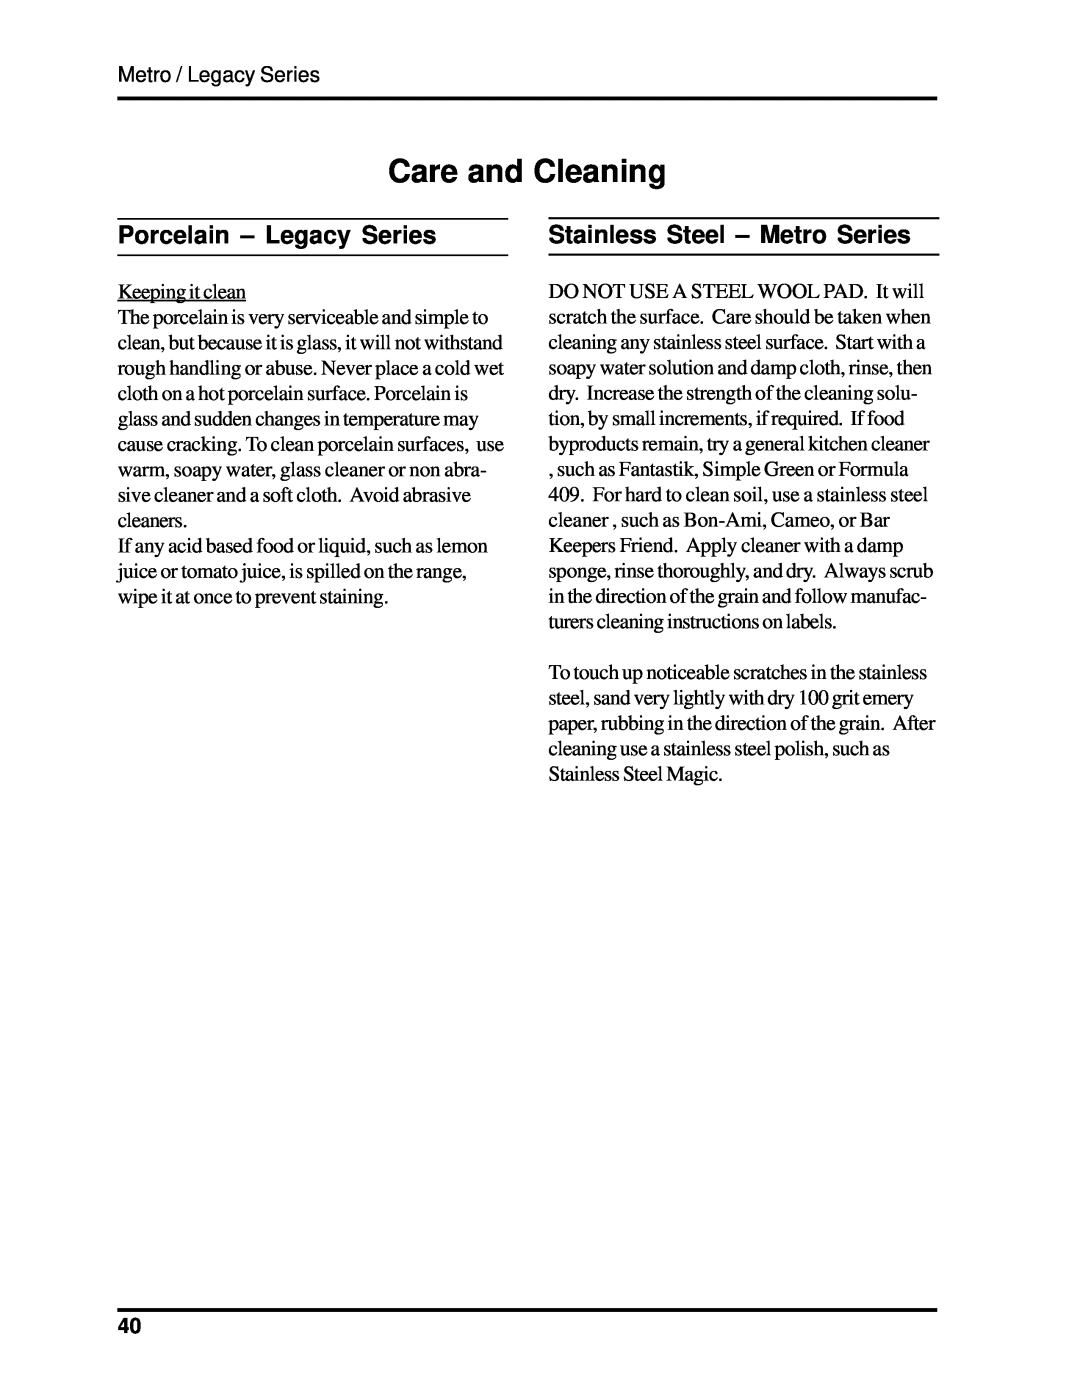 Heartland 3530, 3630 Care and Cleaning, Porcelain – Legacy Series, Stainless Steel – Metro Series 